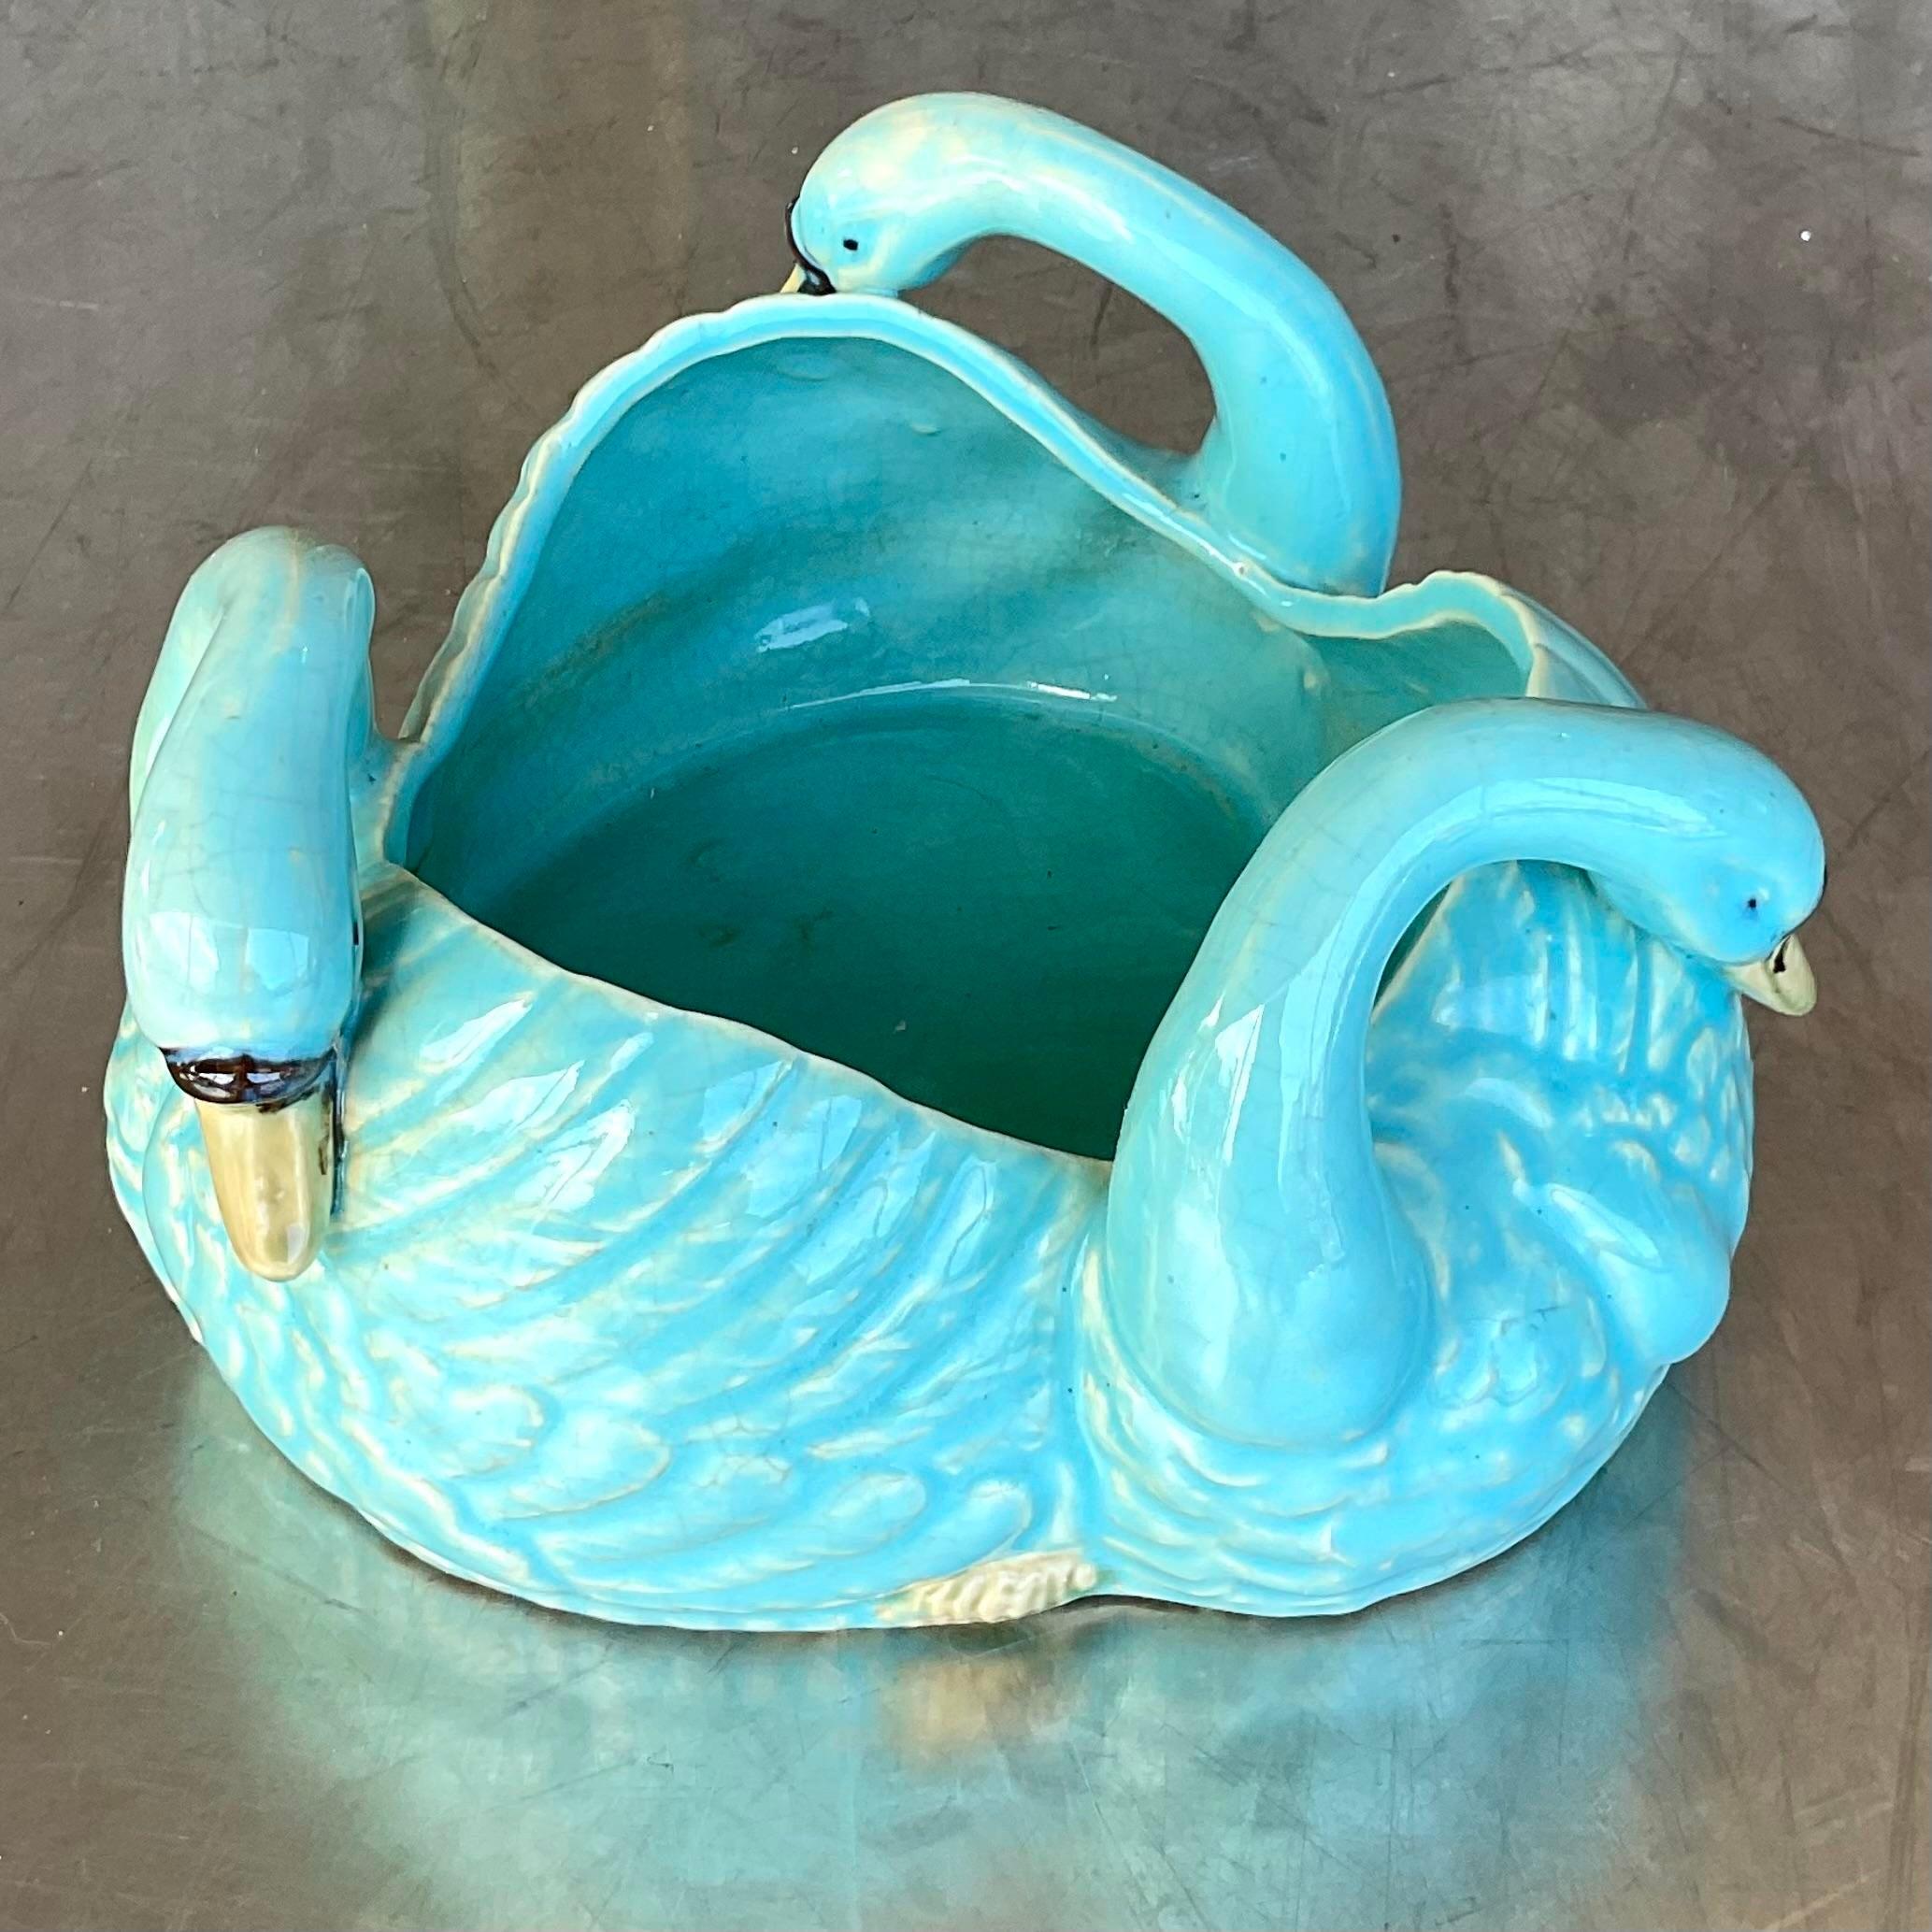 A fabulous vintage Regency centerpiece bowl. A brilliant turquoise blue with a glazed ceramic finish. A ring of three swans gilt tipped beaks. Acquired from a Palm Beach estate.